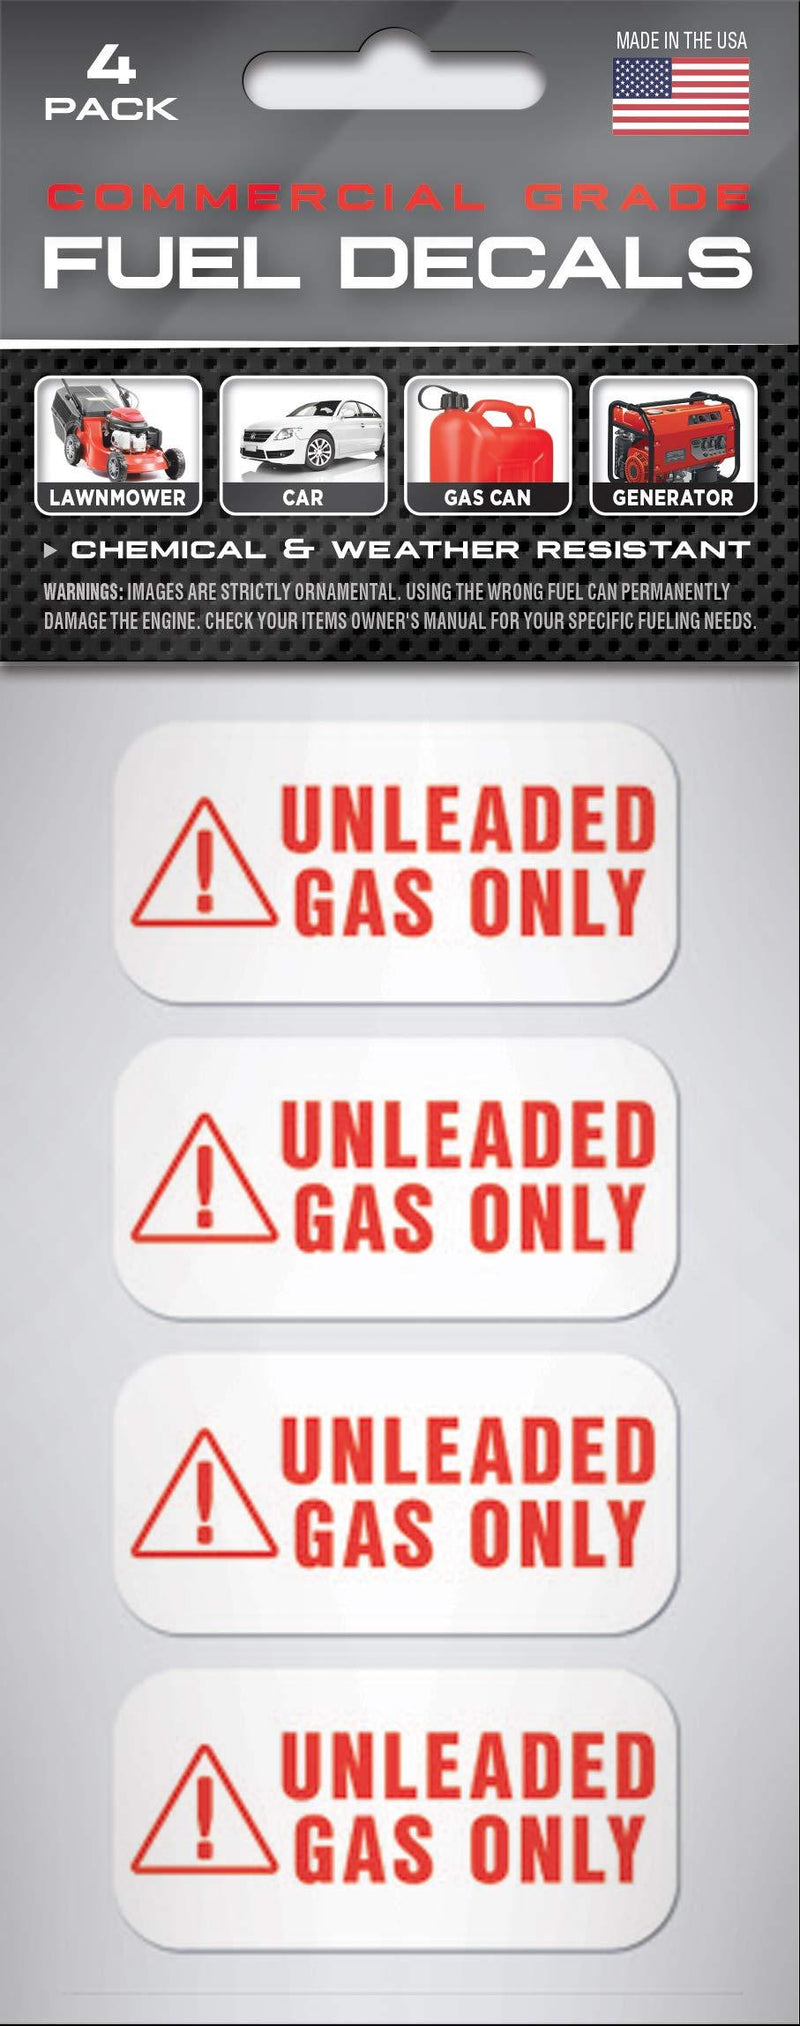  [AUSTRALIA] - UNLEADED Fuel Stickers Decals Labels | 4 Pack - 2" x 1", Rental Car, Automobile, Sedan, Coupe | Extreme Stick | Weather Resistant | Ultra Durable | Unleaded Gas Only Sticker